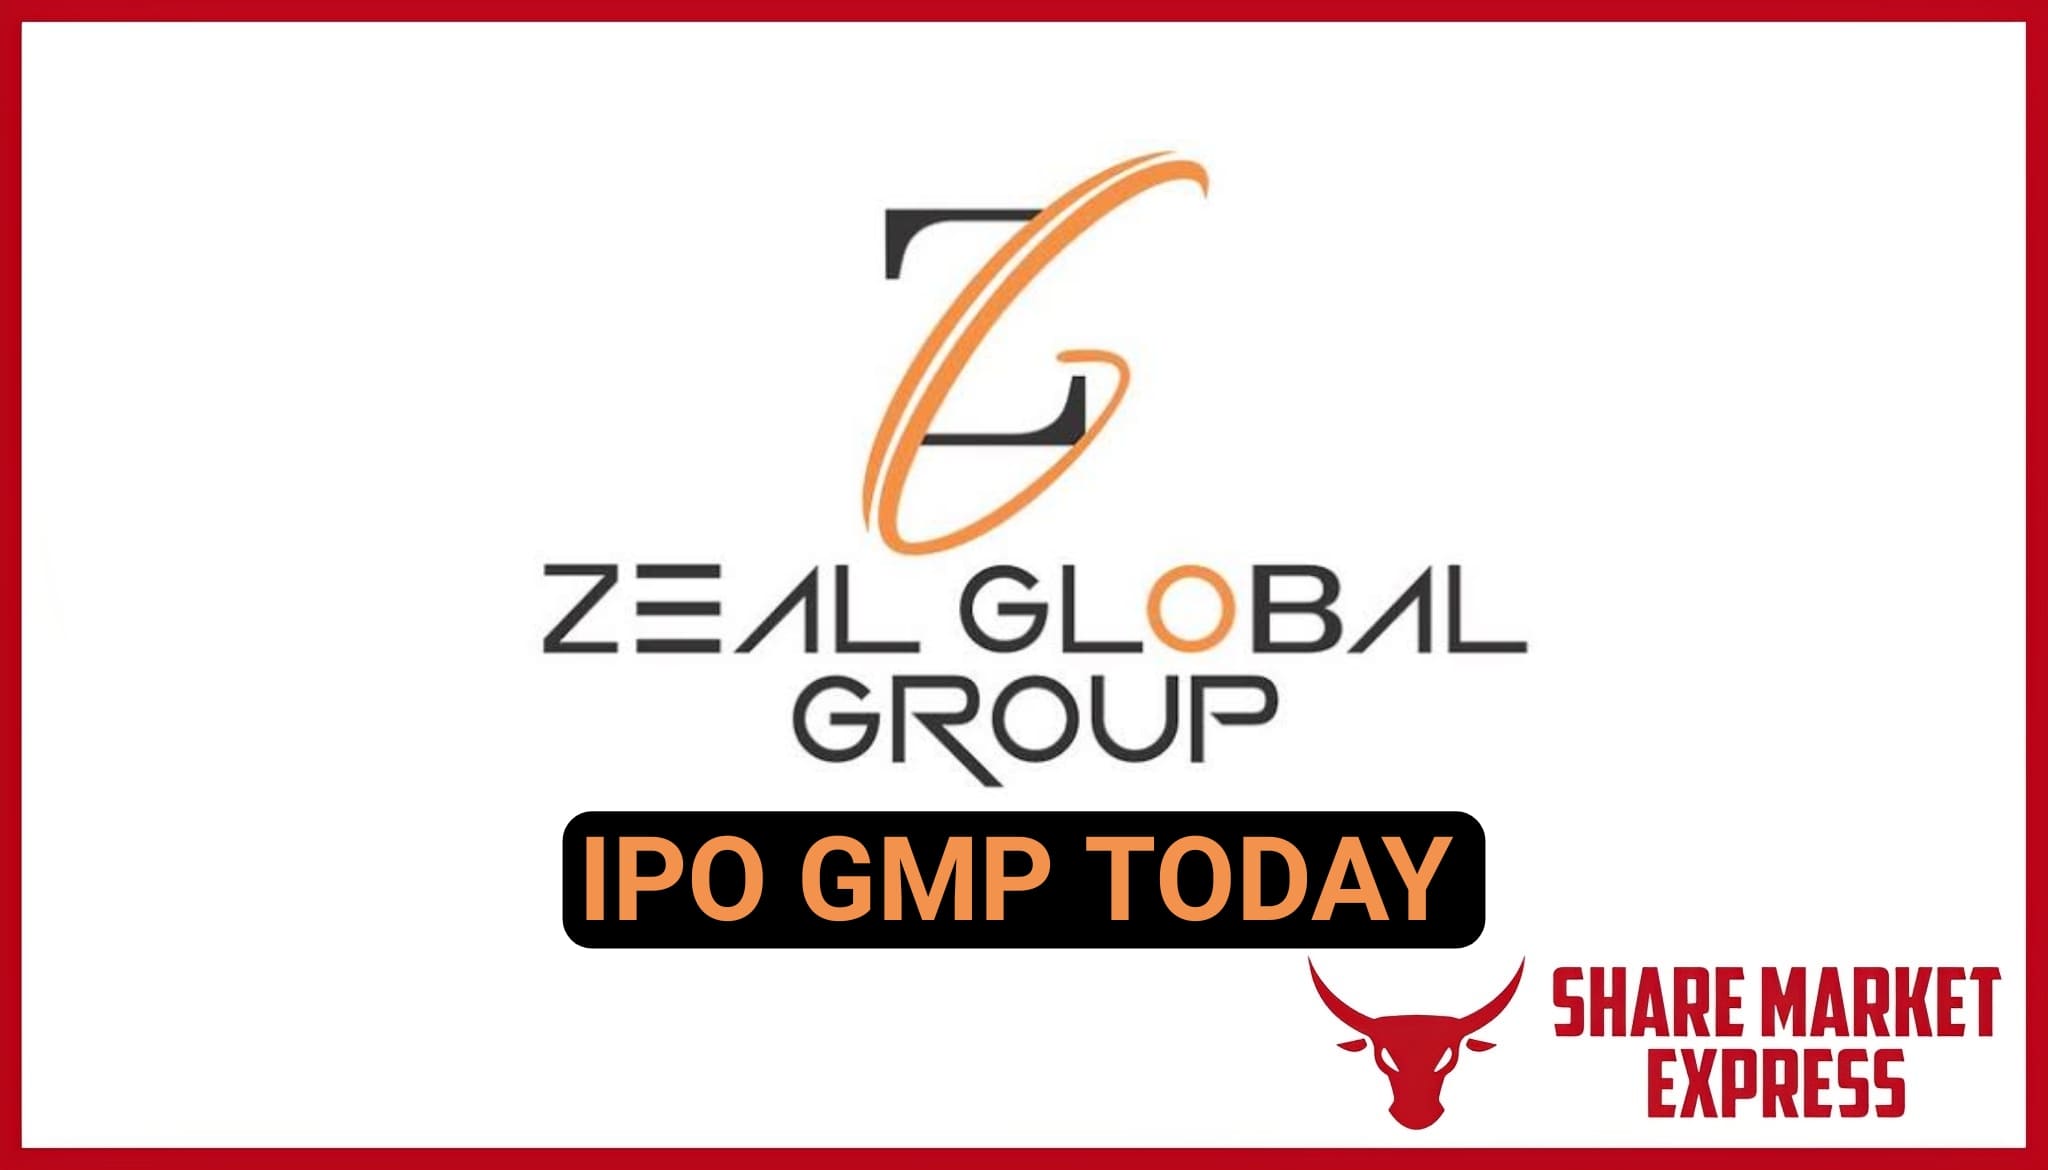 Zeal Global Services IPO GMP Today